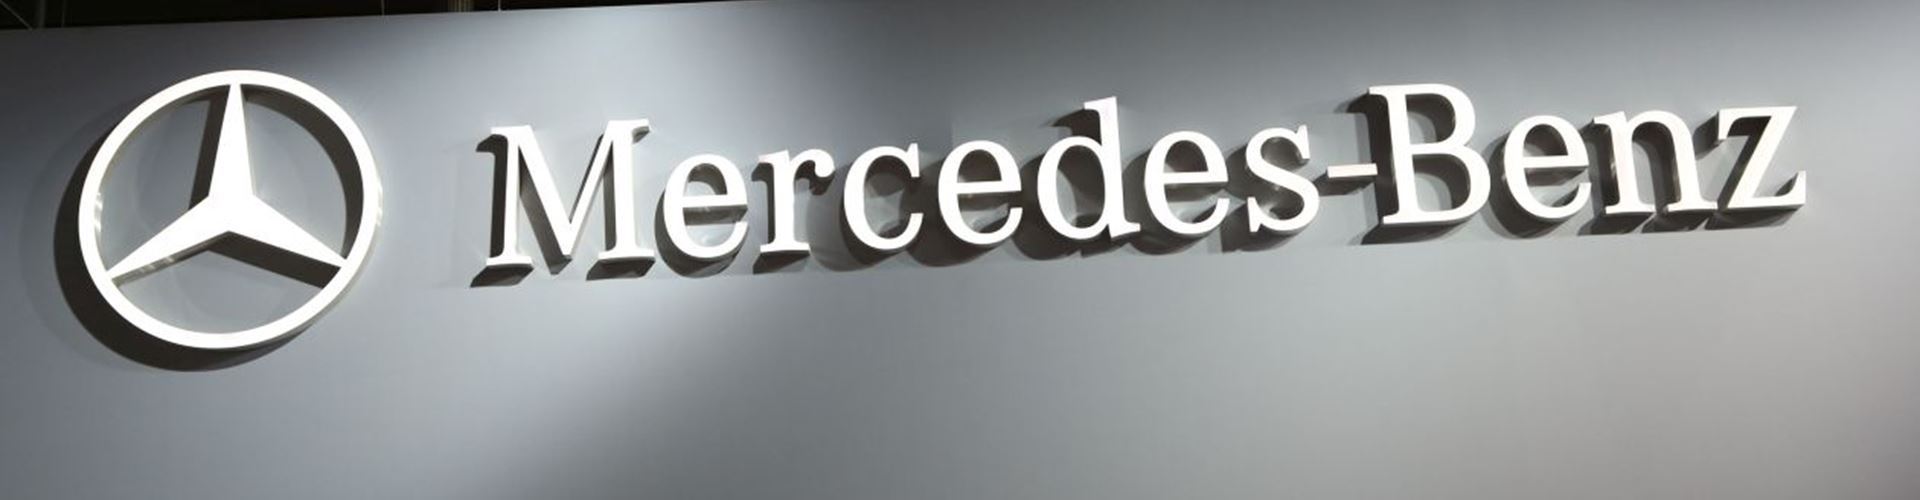 Mercedes-Benz accused in China price-fix probe